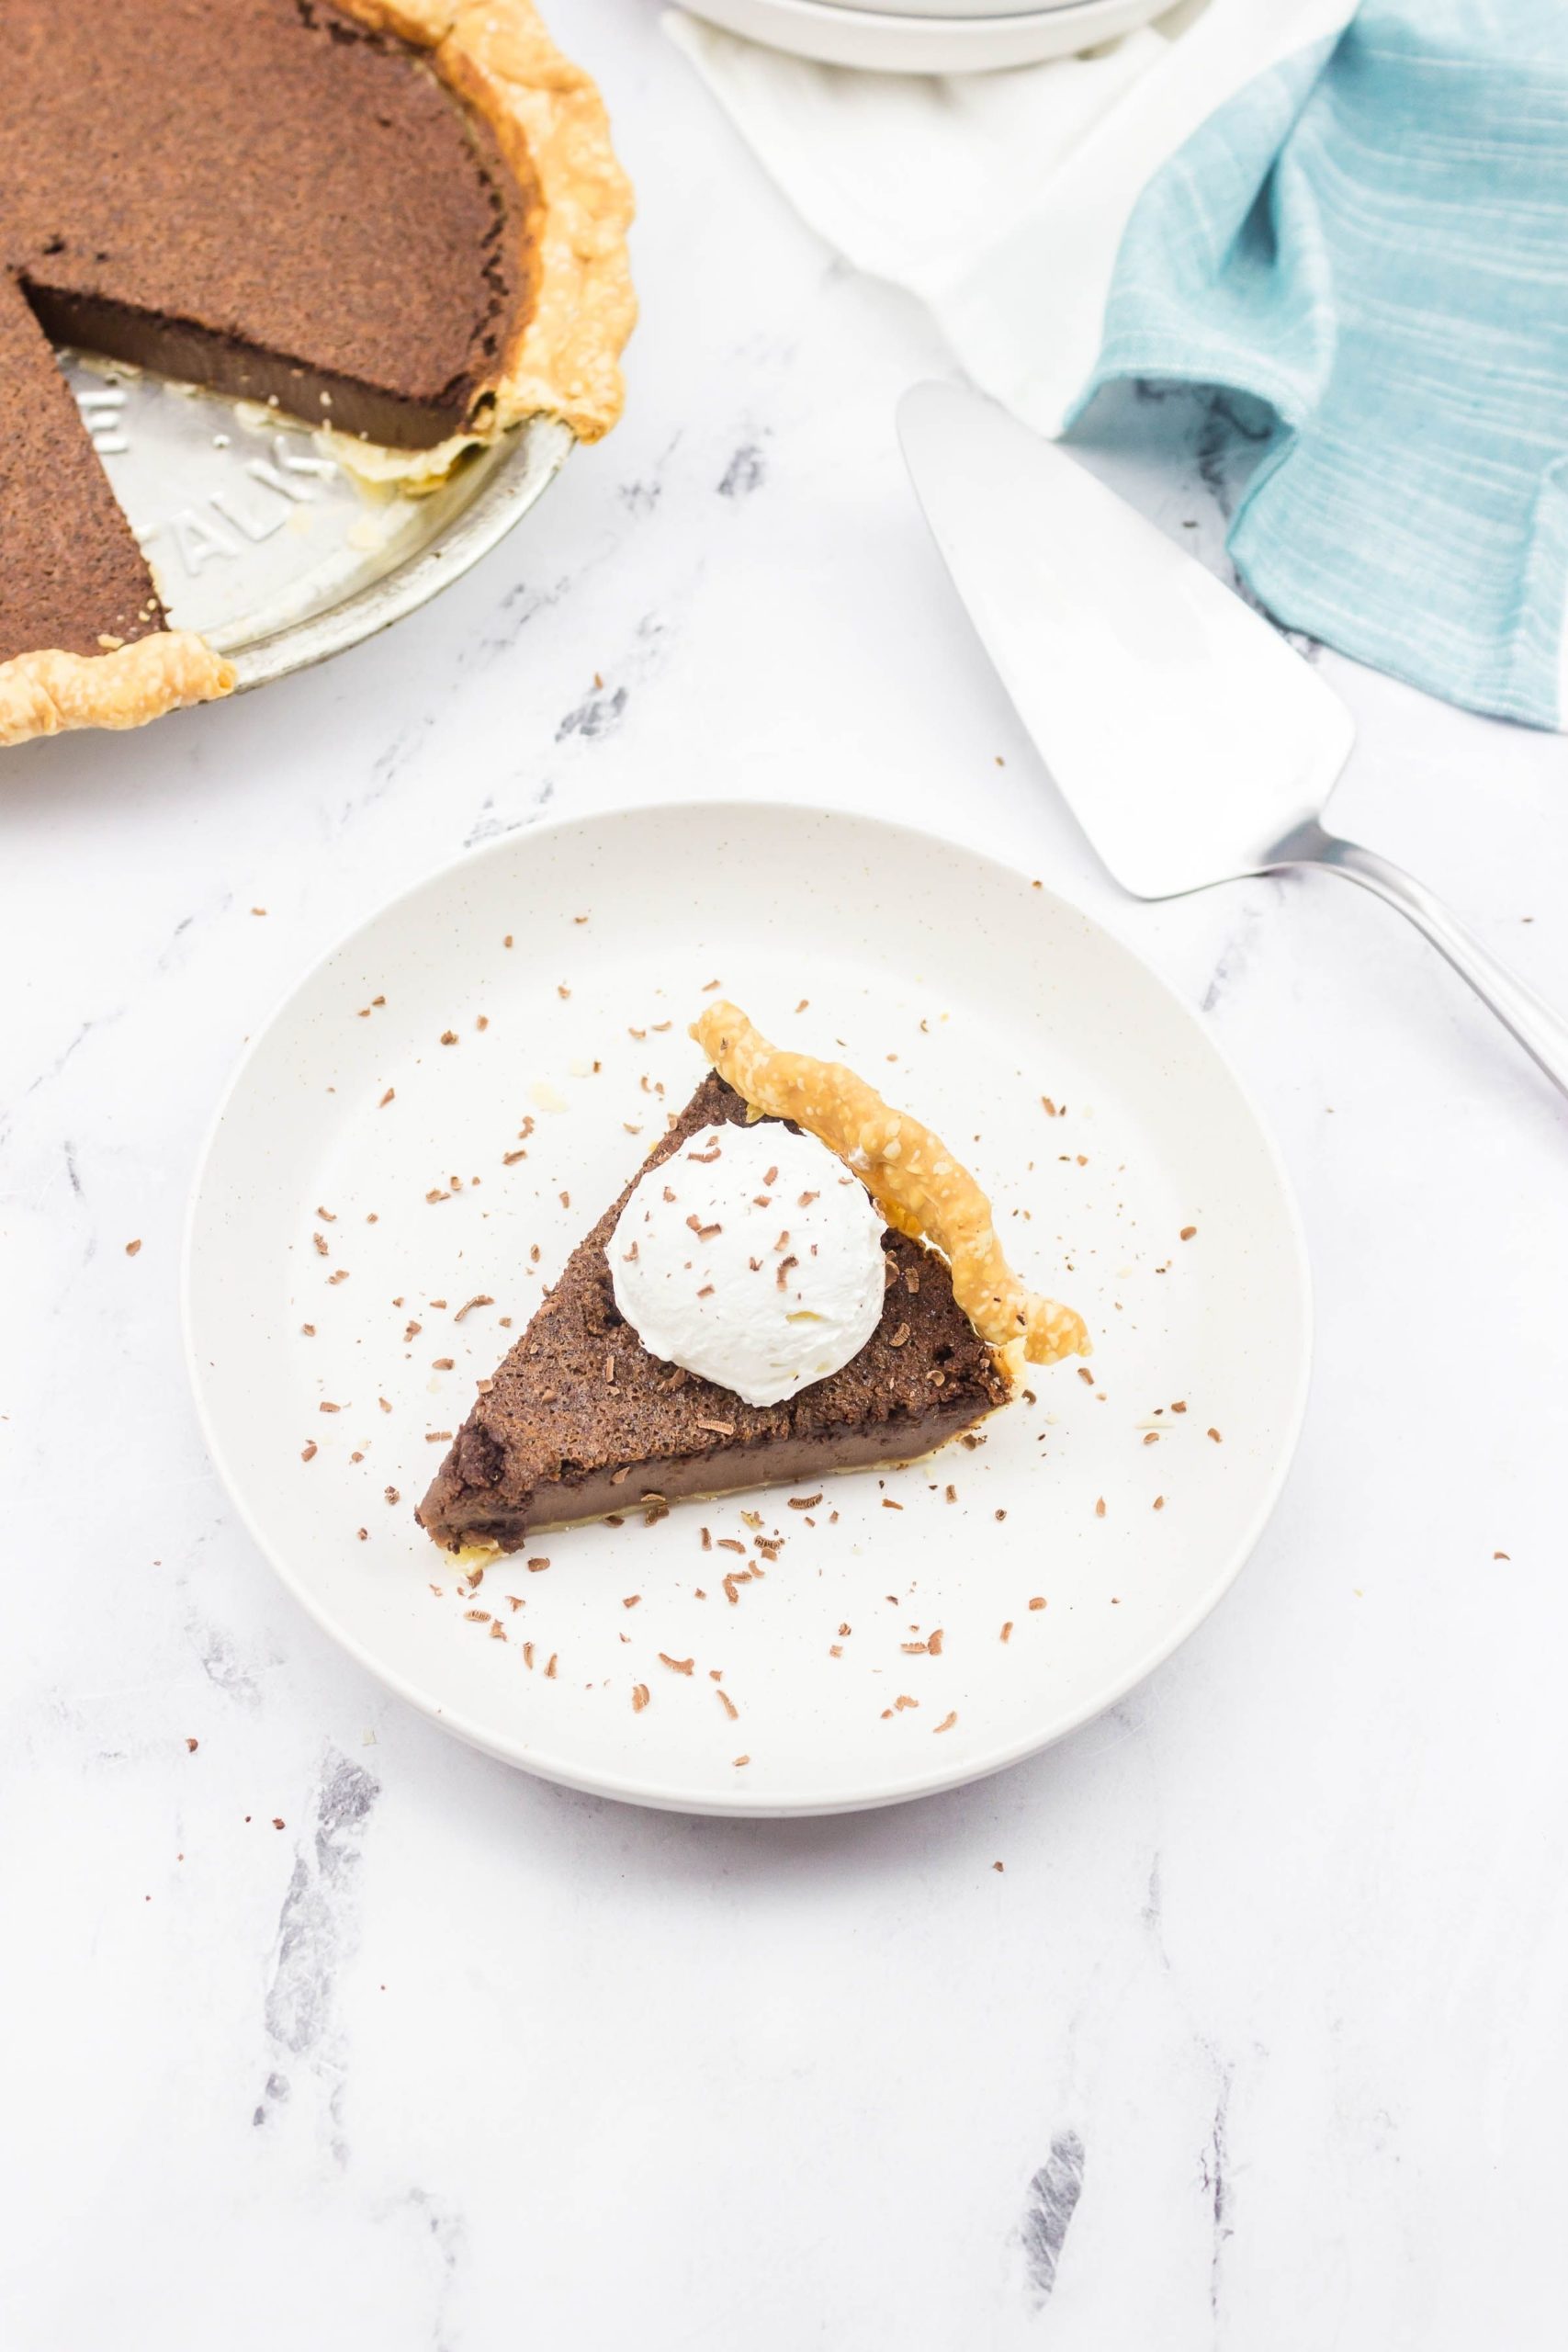  Chocolate Chess Pie on a white plate. With a server and a blue napkin on the side.